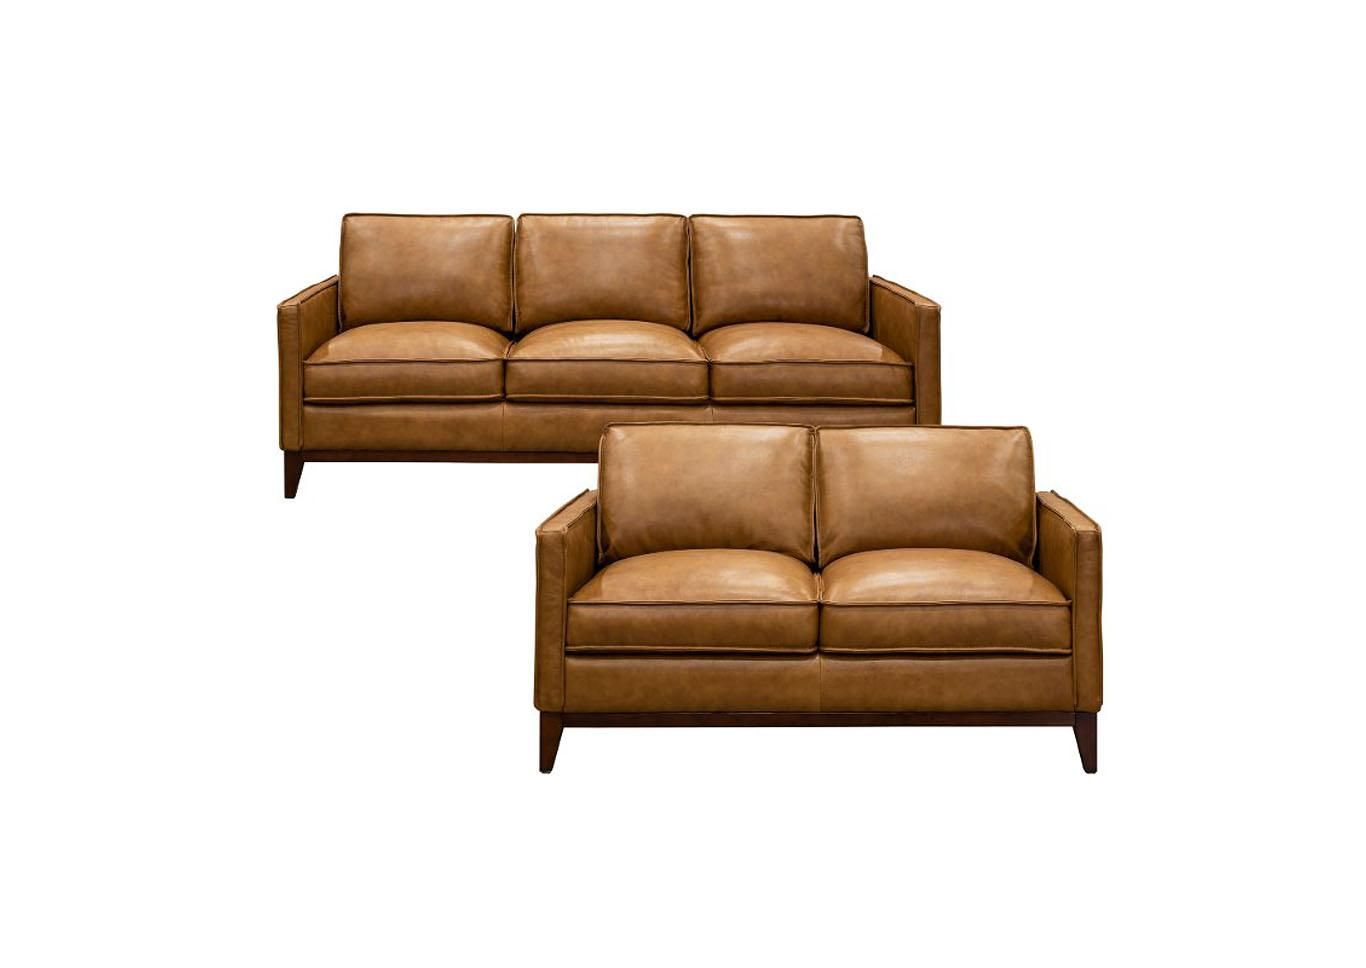 Newport Top Grain Leather Sofa And Love Seat Nader's Furniture With Regard To Top Grain Leather Loveseats (View 15 of 15)